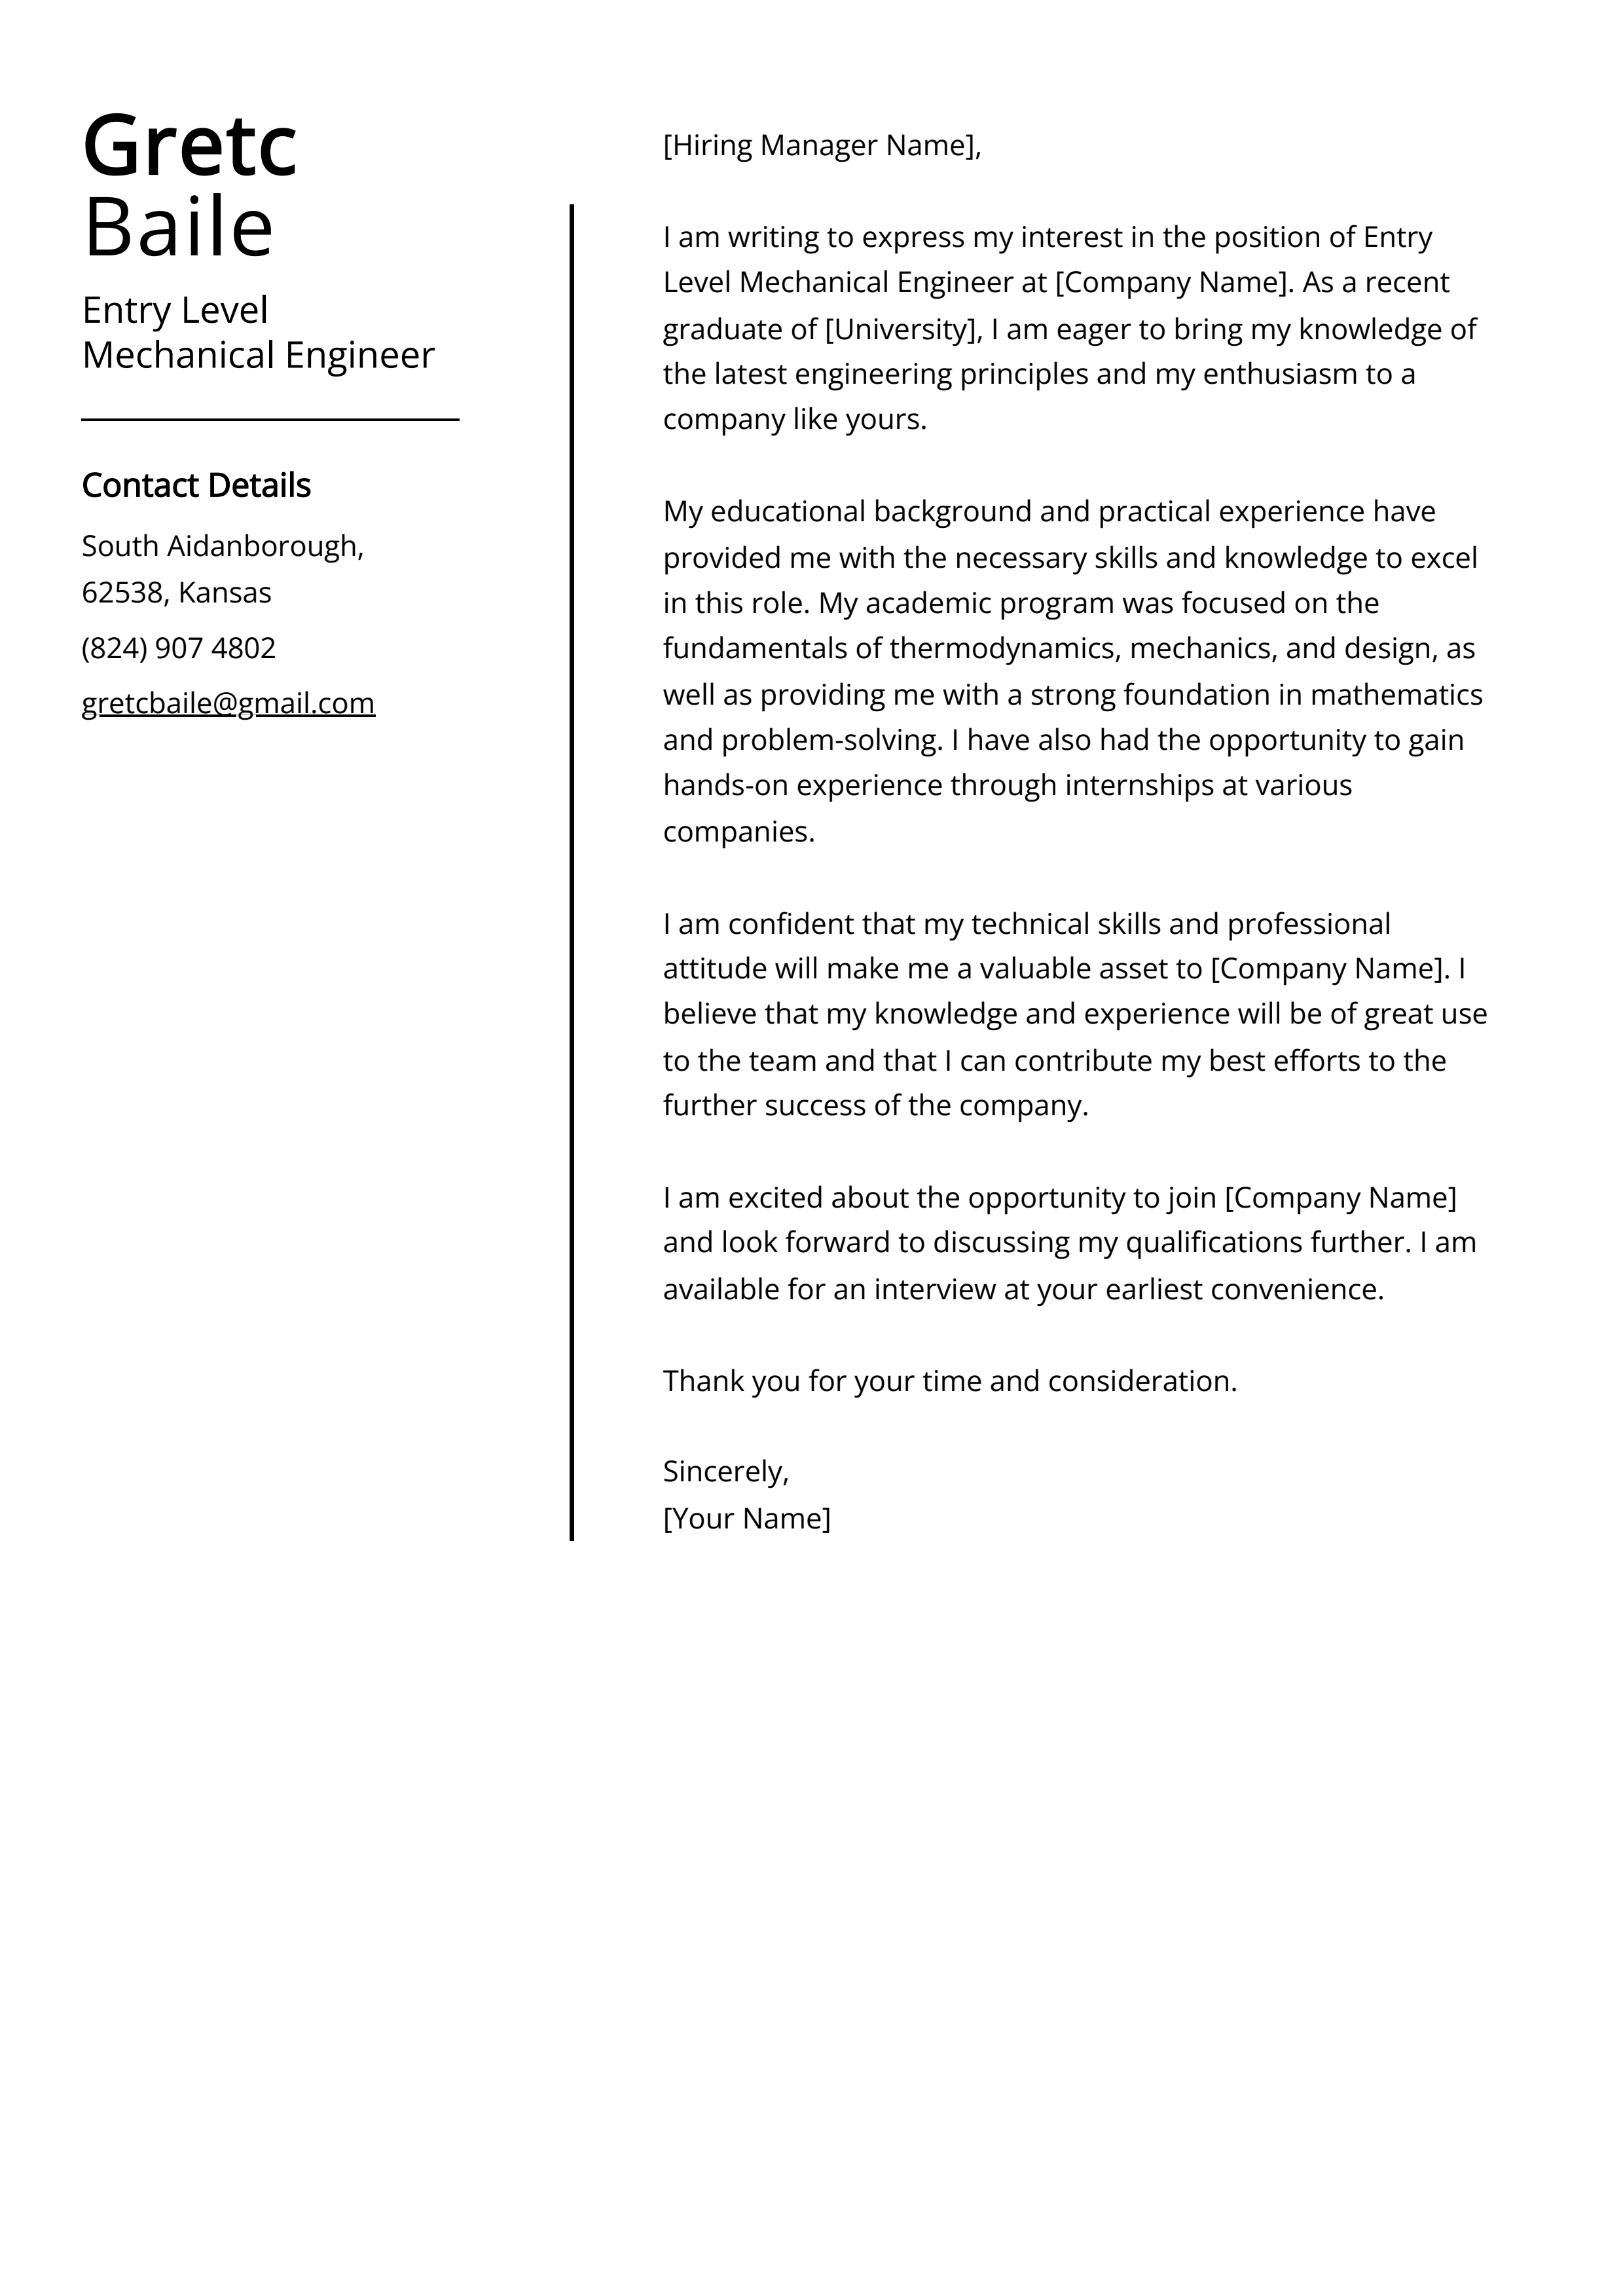 Entry Level Mechanical Engineer Cover Letter Example